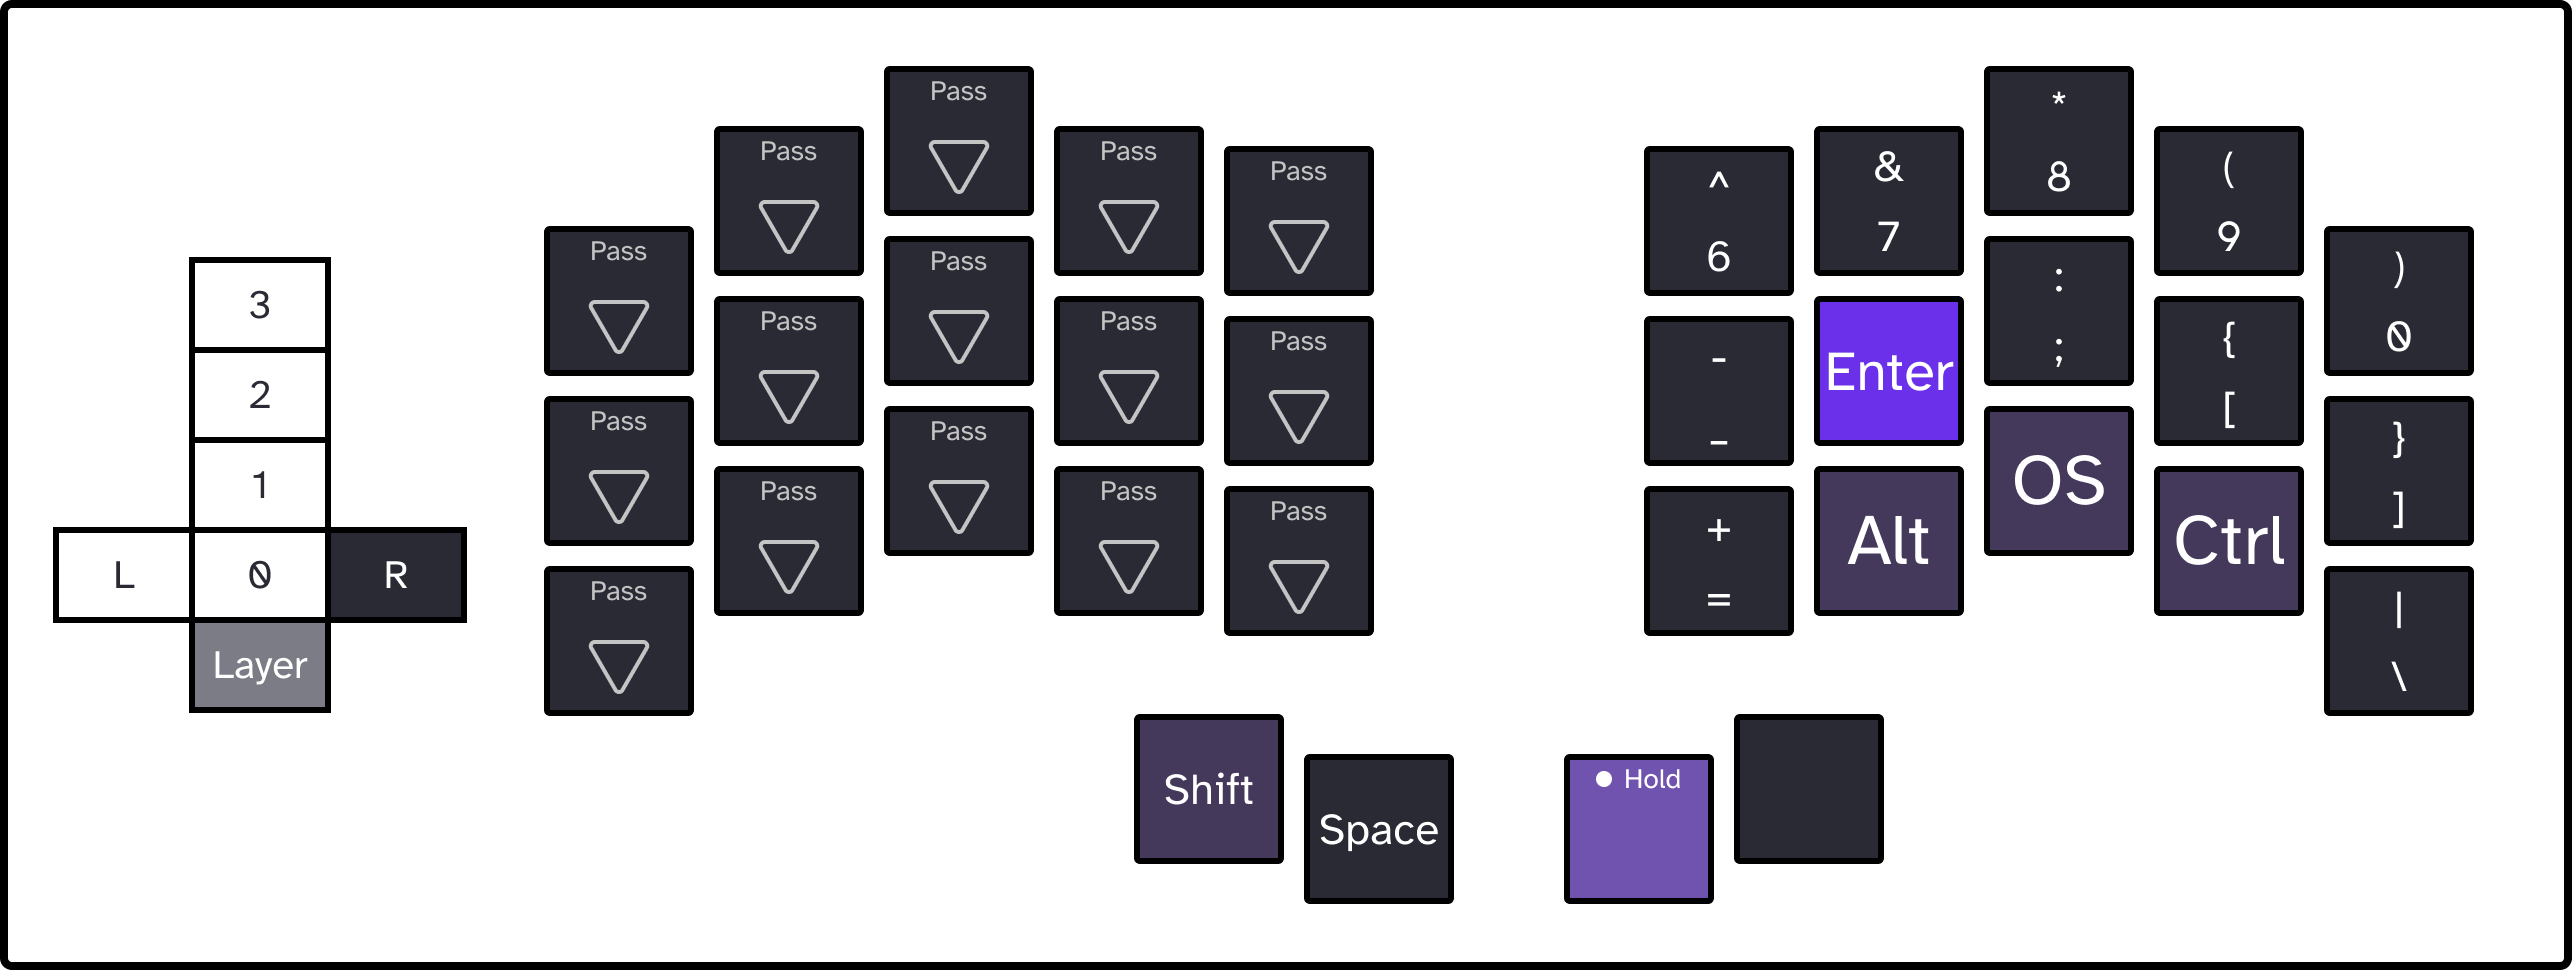 Right peek layer of my new keyboard layout for the Ferris Sweep. Keys from left to right, going down each finger from top to bottom. Left pinky: Pass, Pass, Pass. Left ring: Pass, Pass, Pass. Left middle:Pass, Pass, Pass. Left index first column:Pass, Pass, Pass. Left index second column: Pass, Pass, Pass. Left thumb 1: Pass. Left thumb 2: Shift. Right thumb 1: None (held). Right thumb 2: Pass. Right index 2: Number 6, Dash, Equals. Right index 1: Number 7, Enter, Alt. Right middle: Number 8, Semicolon, OS. Right ring: Number 9, Left Square Bracket, Control. Right pinky: Number 0, Right Square Bracket, Back Slash.